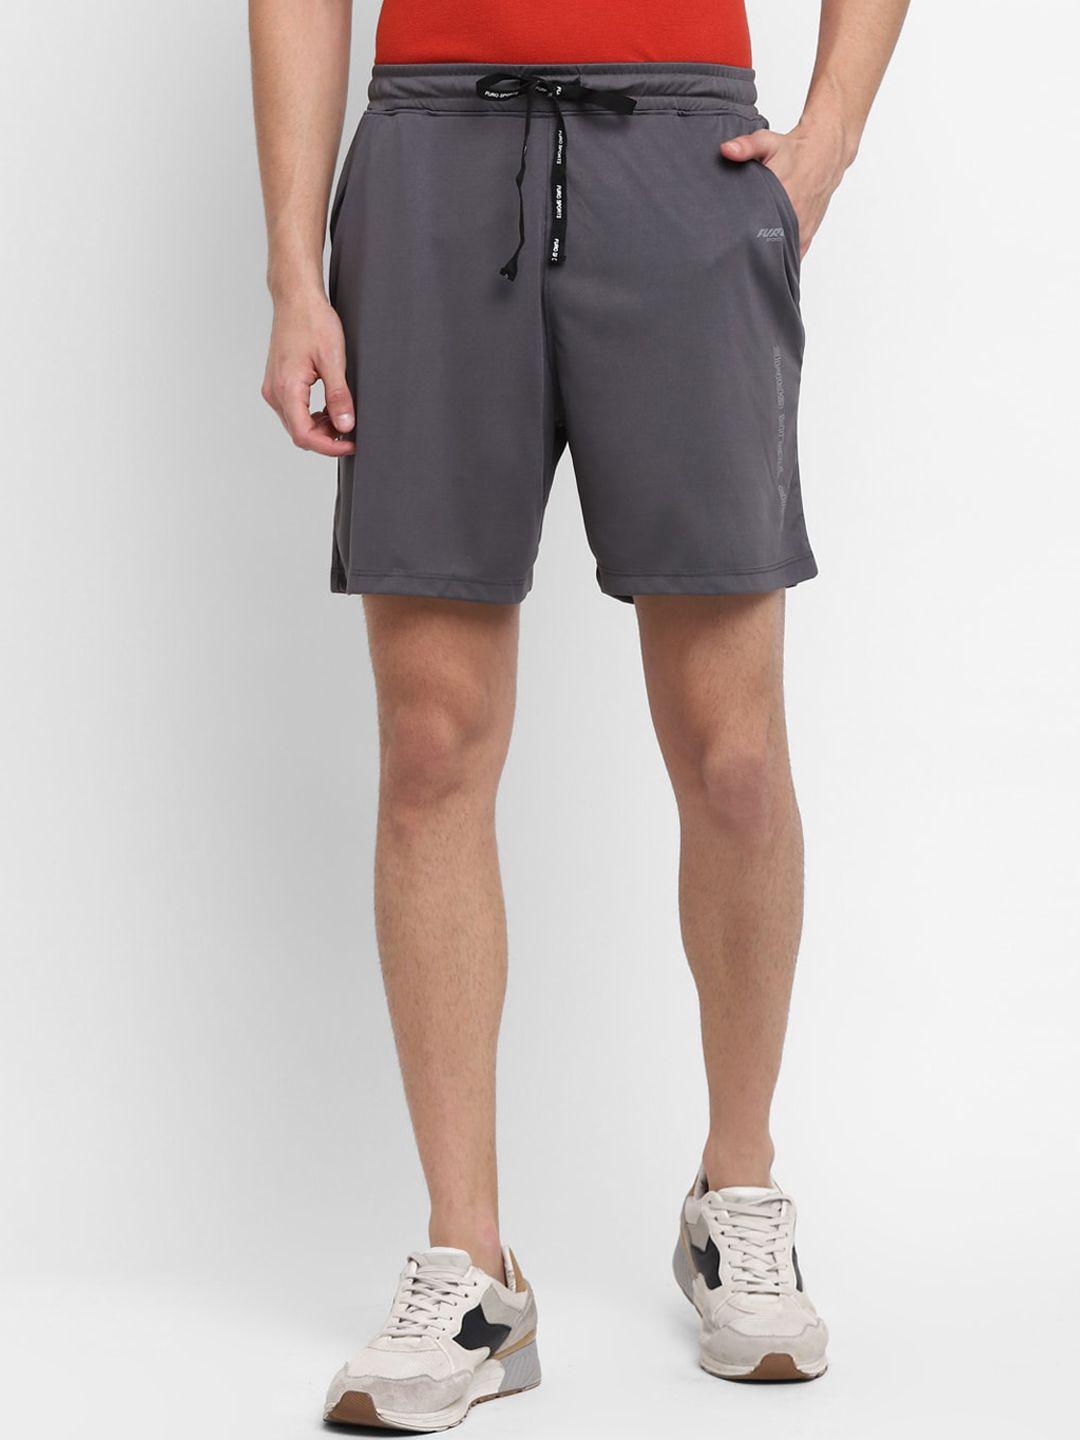 furo-by-red-chief-men-grey-sports-shorts